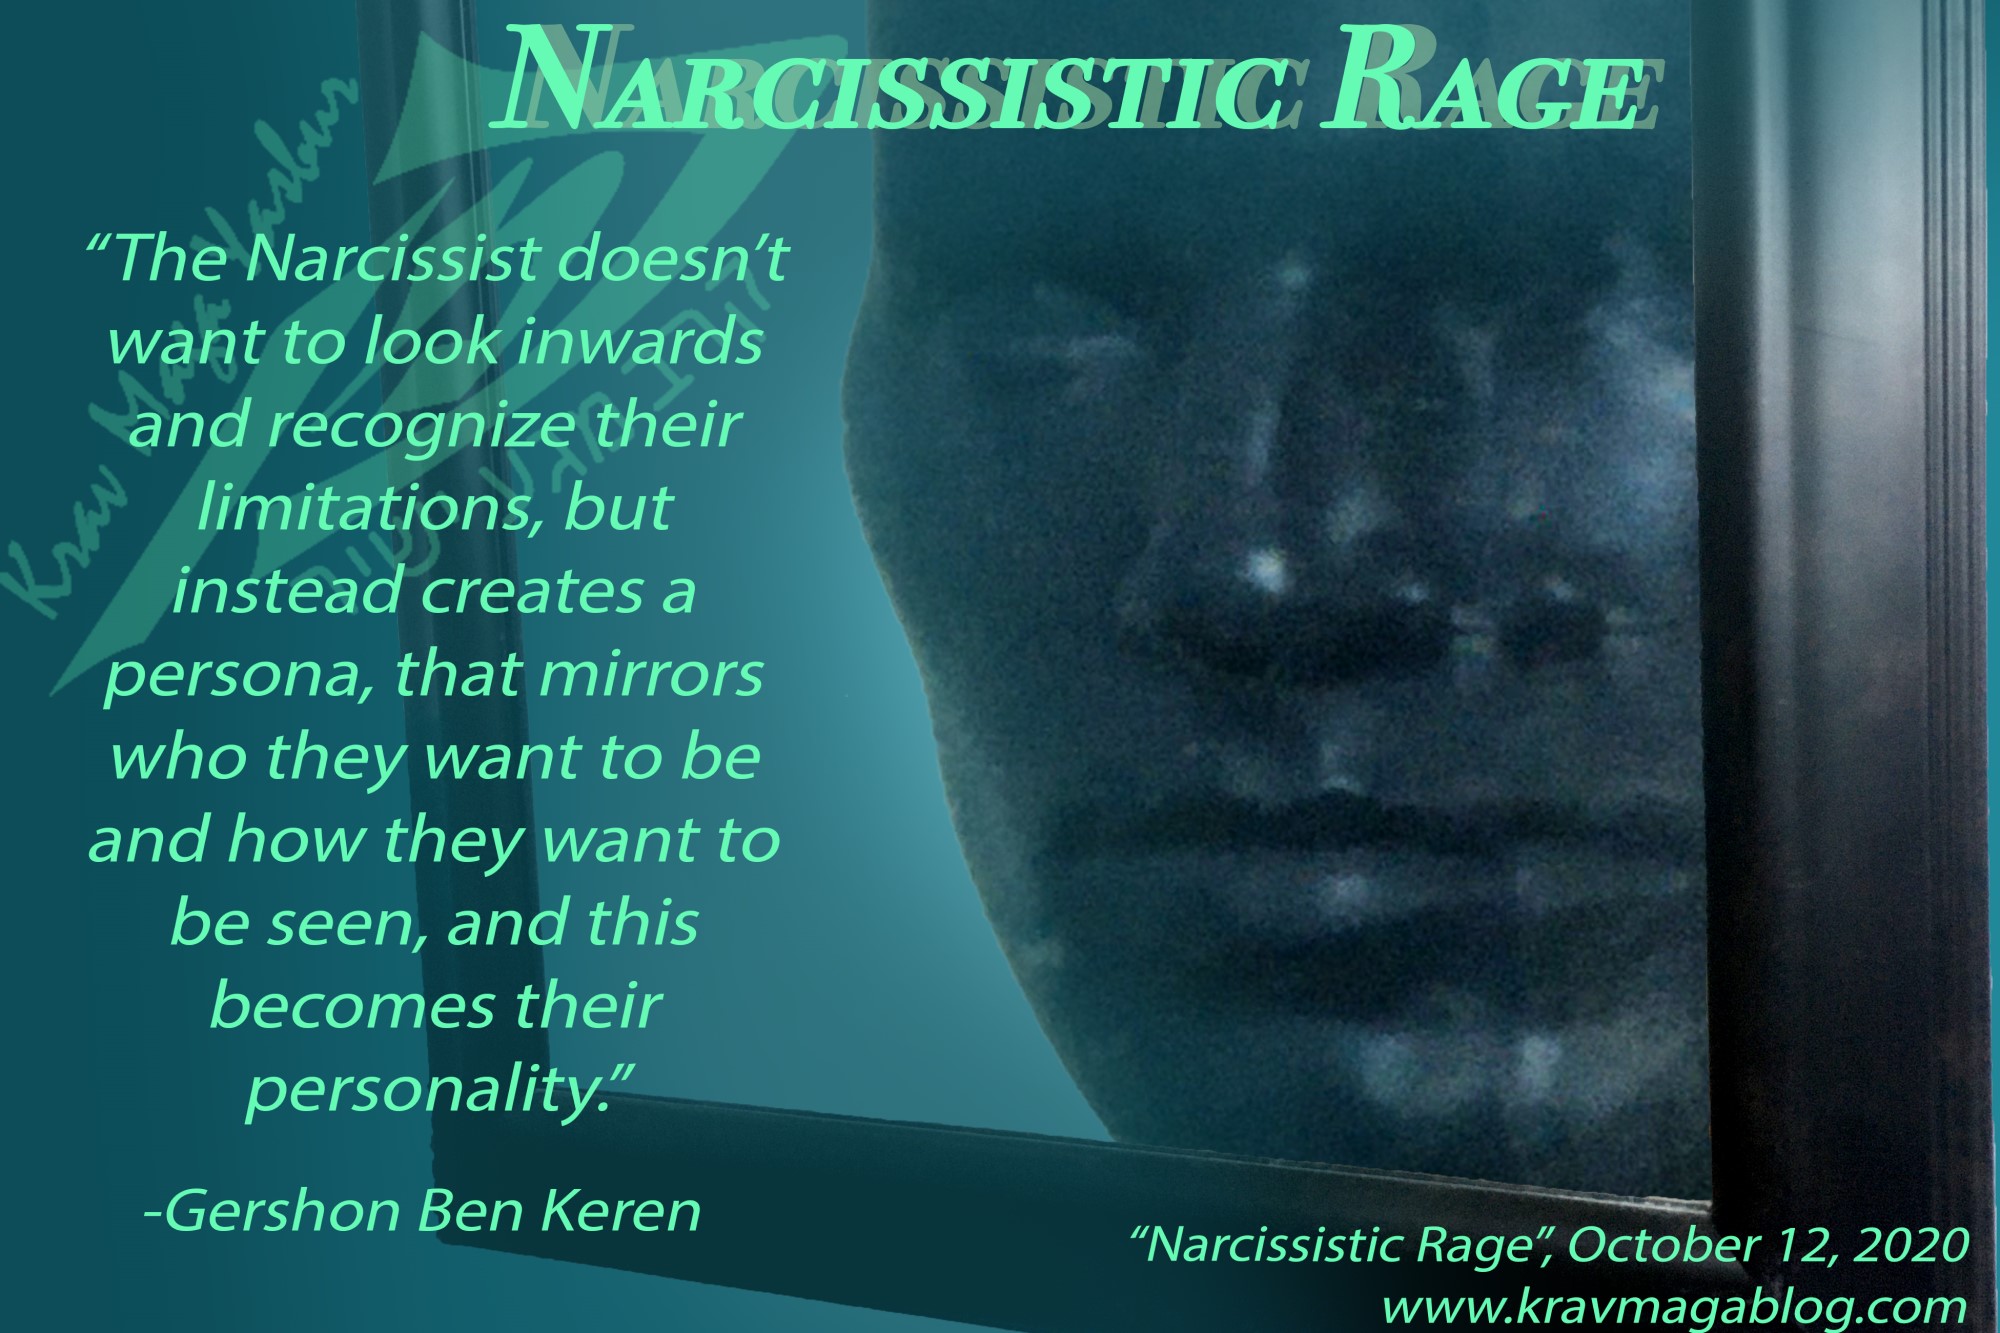 Blog About Narcissistic Rage